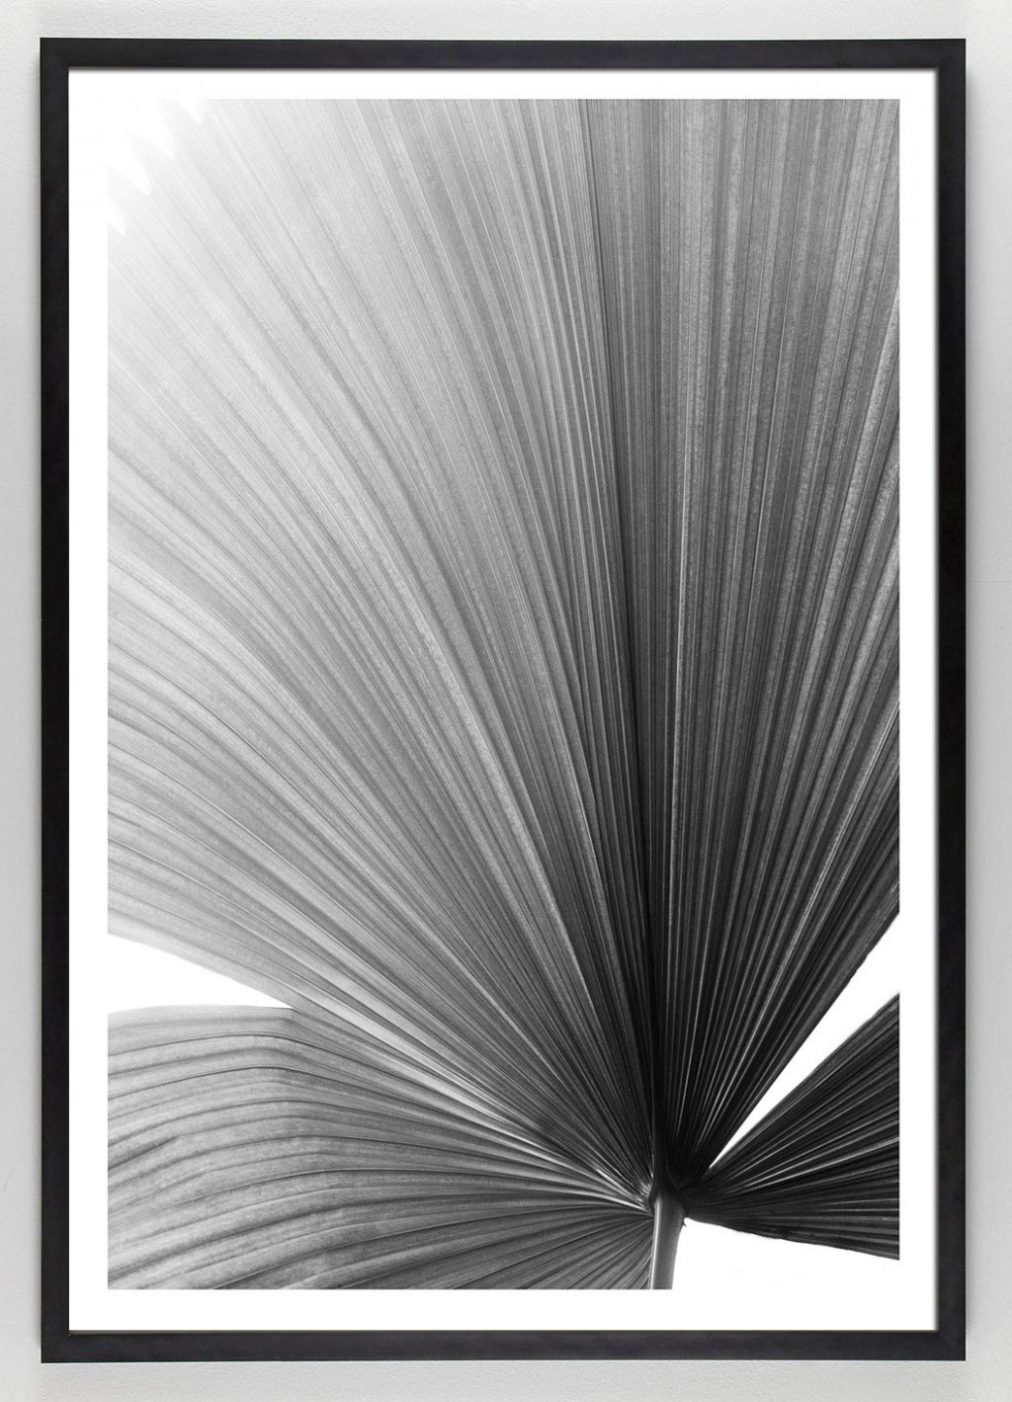 Black and White Palm Frond Art